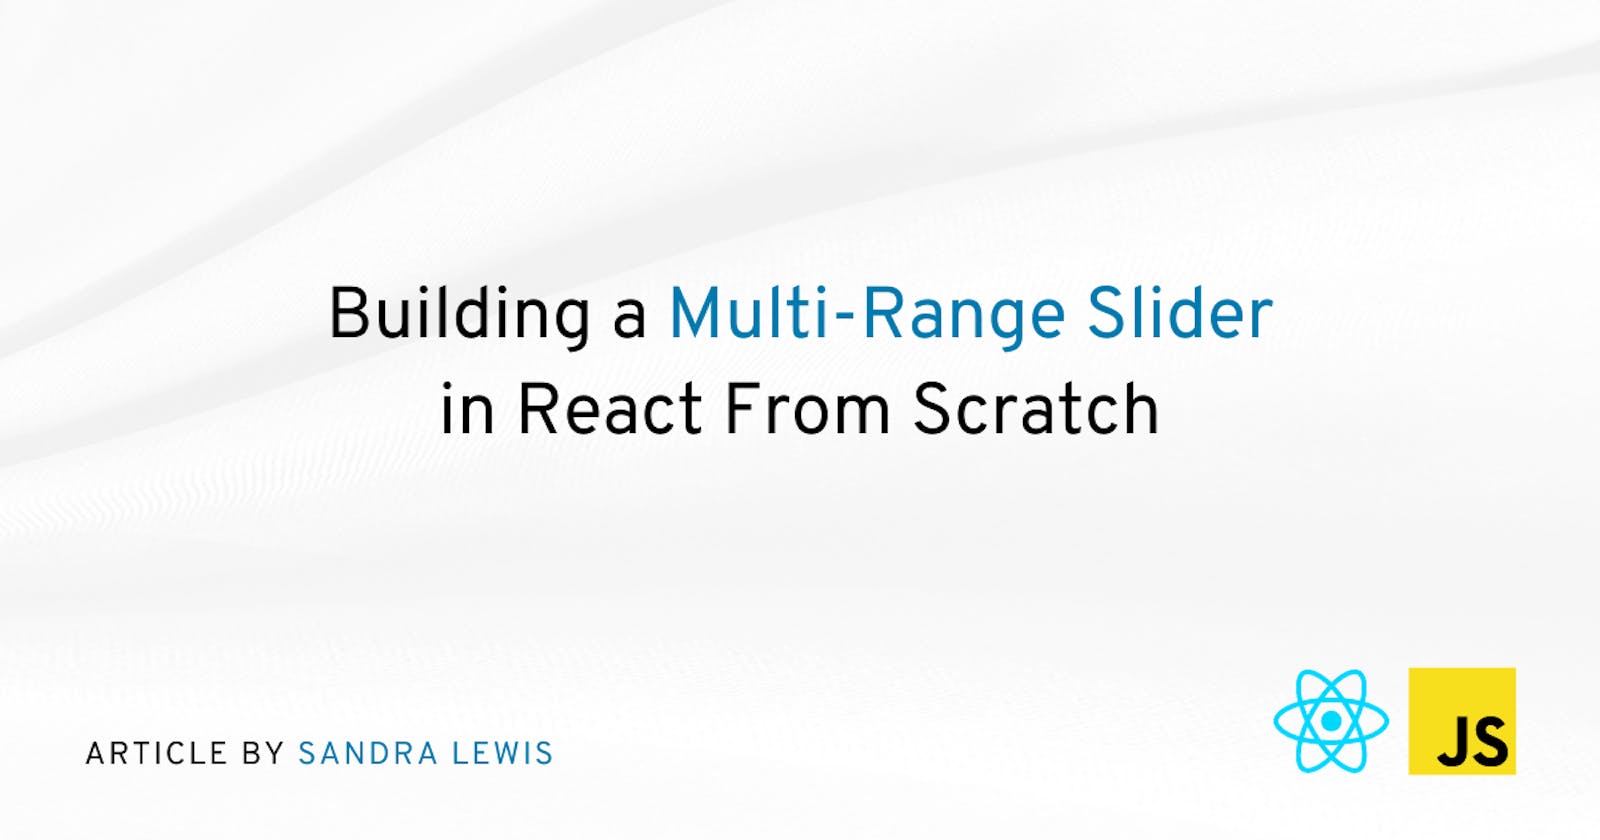 Building a Multi-Range Slider in React From Scratch